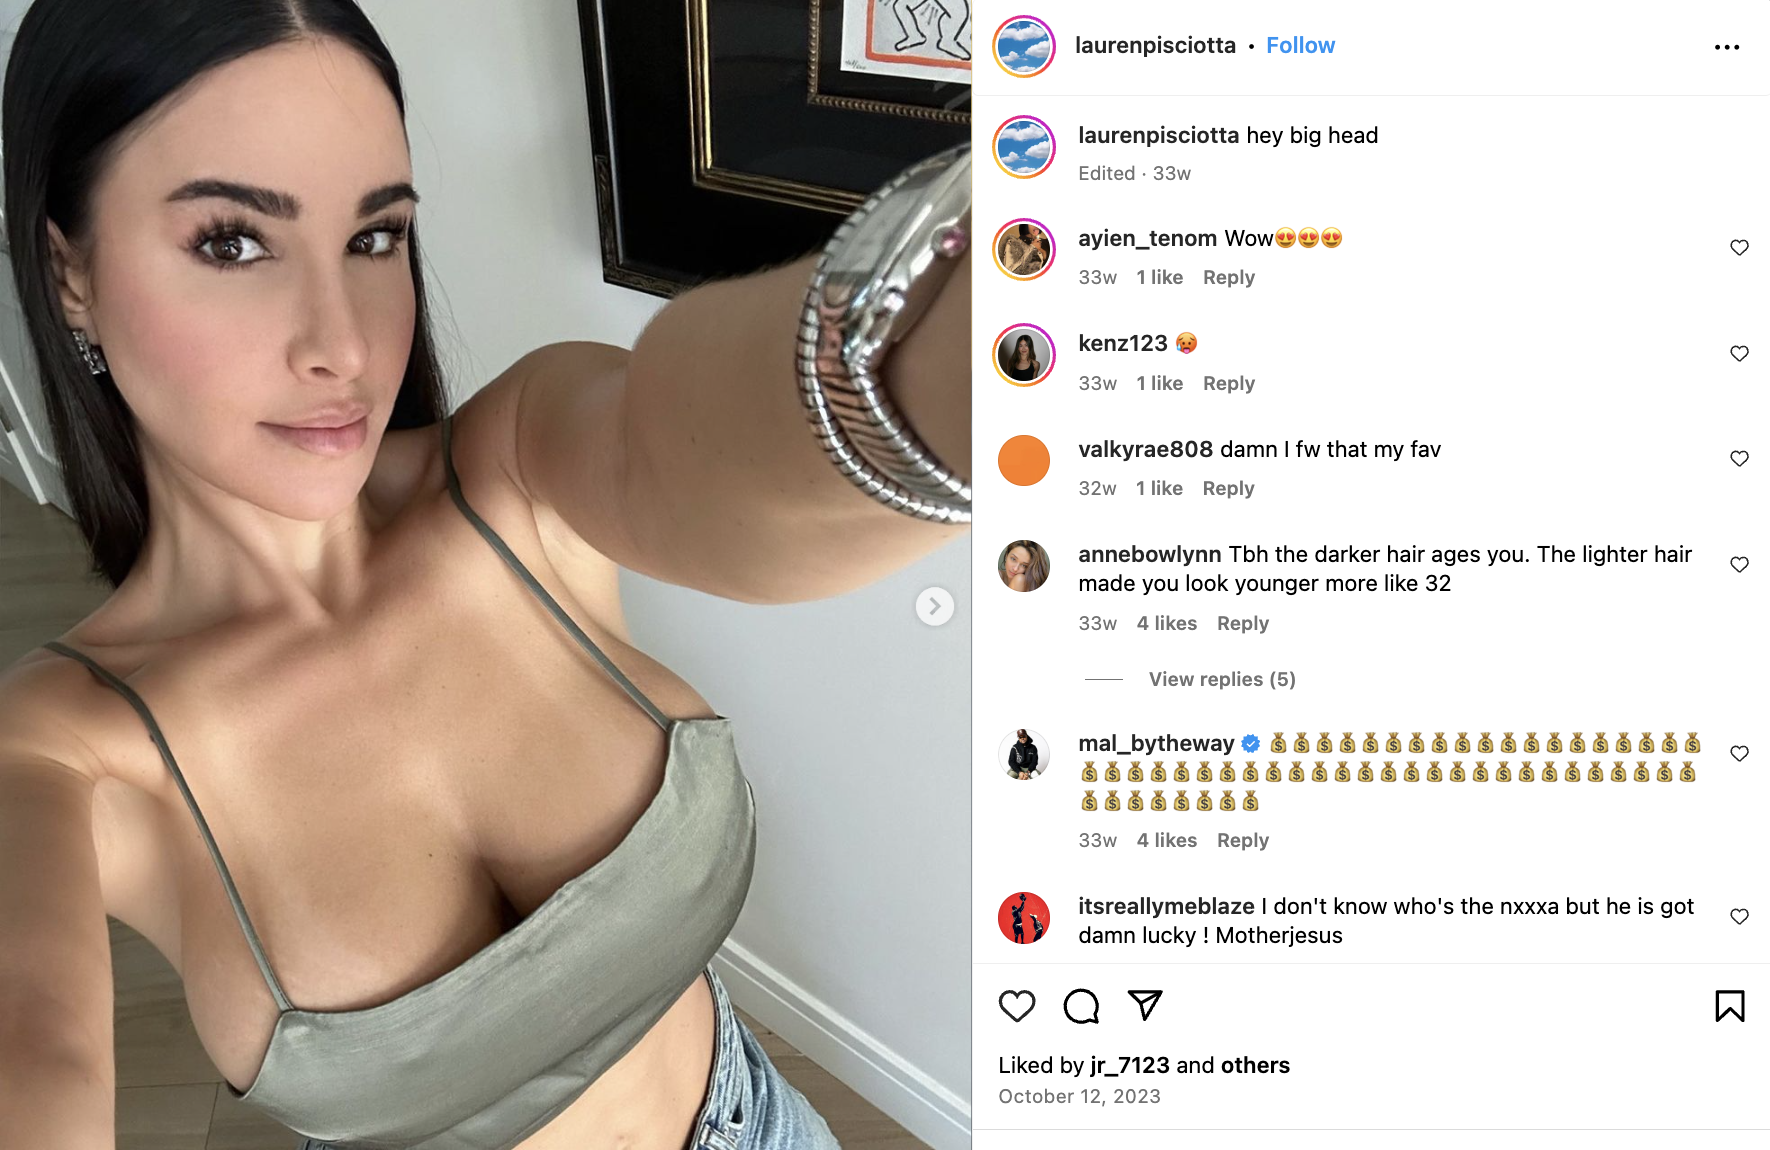 Lauren Pisciotta taking a selfie in a crop top. Comments from followers are visible, praising her appearance